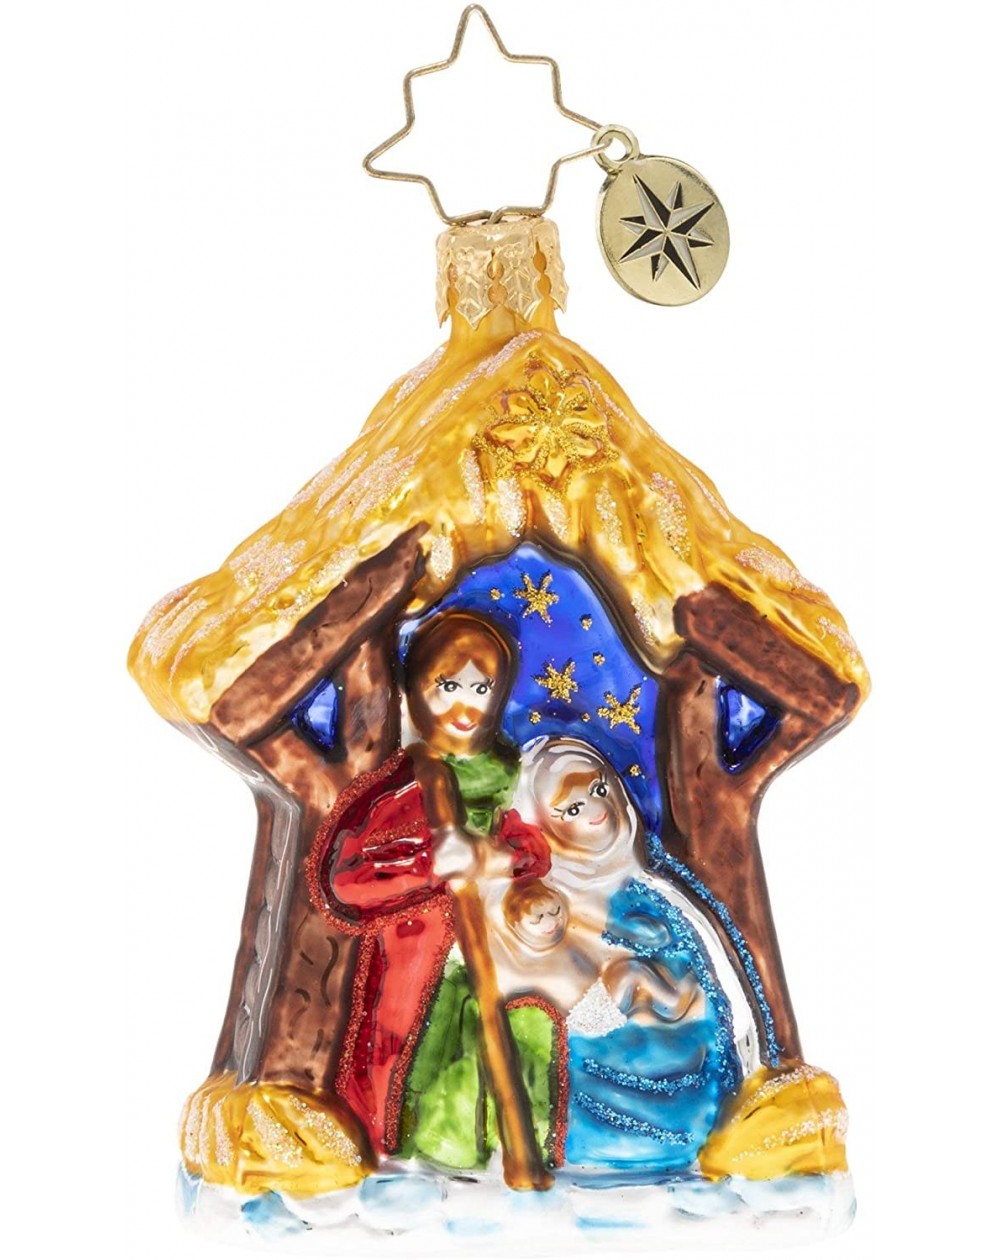 Ornaments Hand-Crafted European Glass Christmas Ornament- Asleep in The Manger Gem - Asleep in the Manger - CV193WNM8OD $22.72